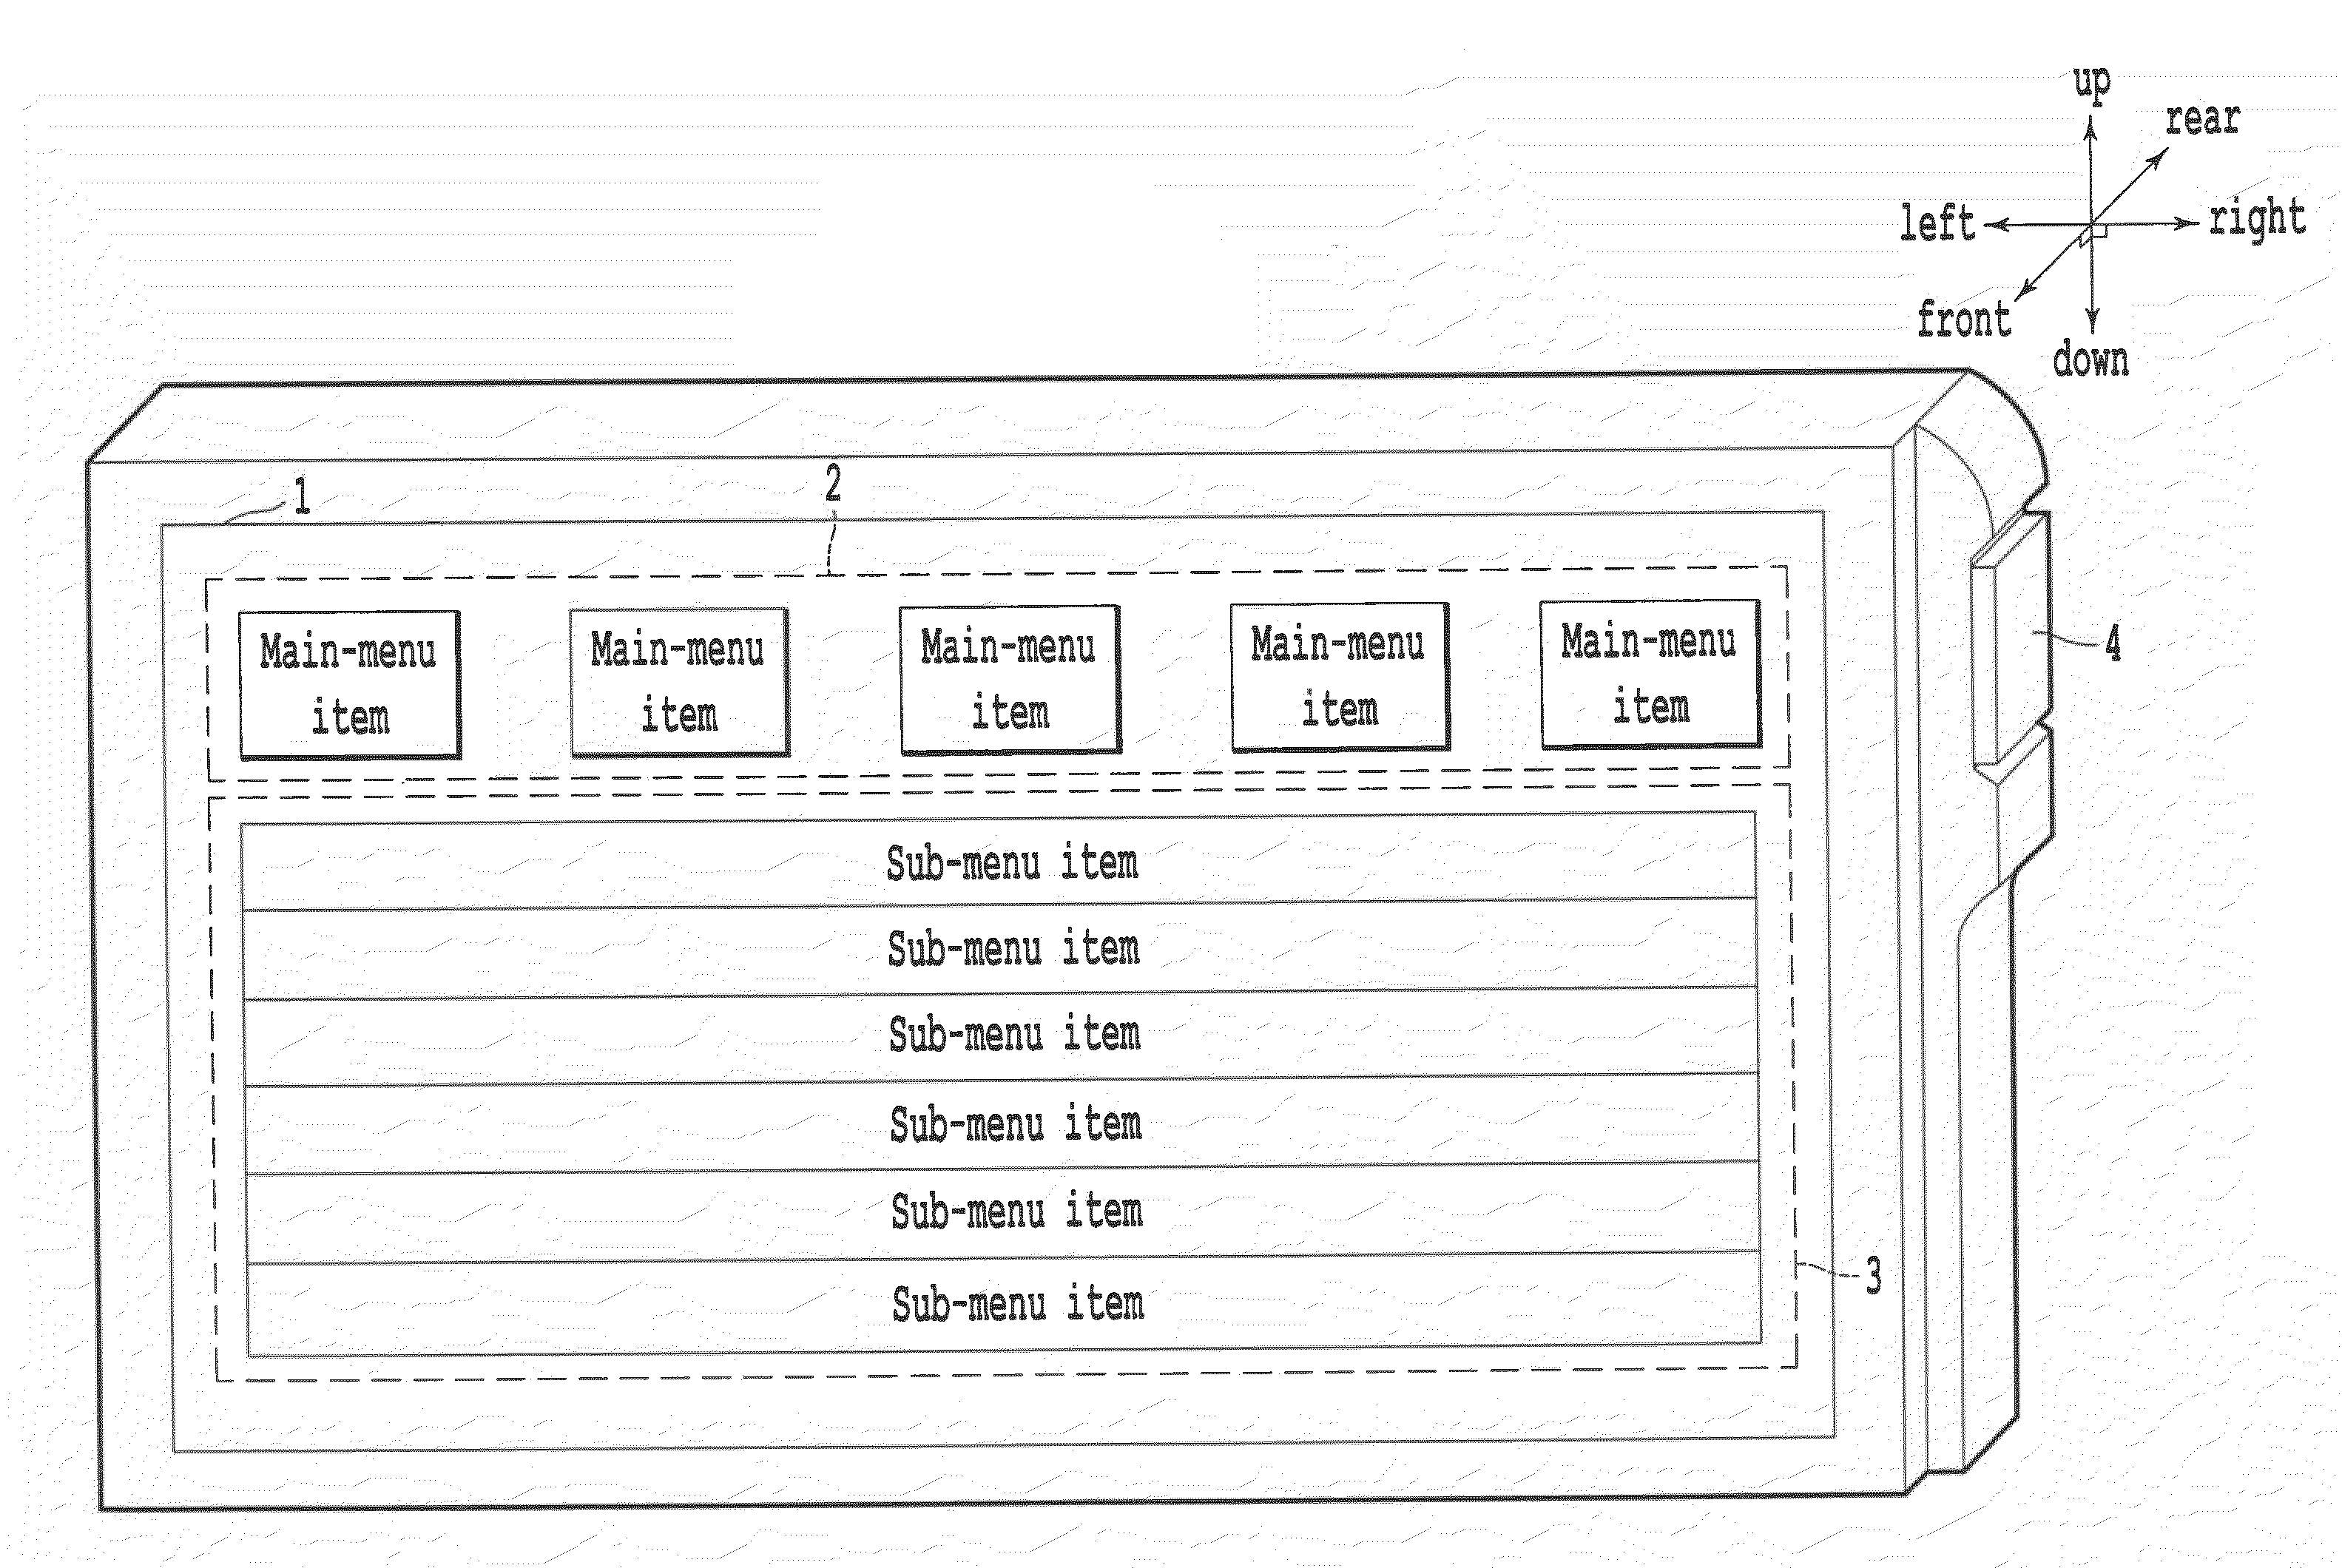 Electronic apparatus with display screen